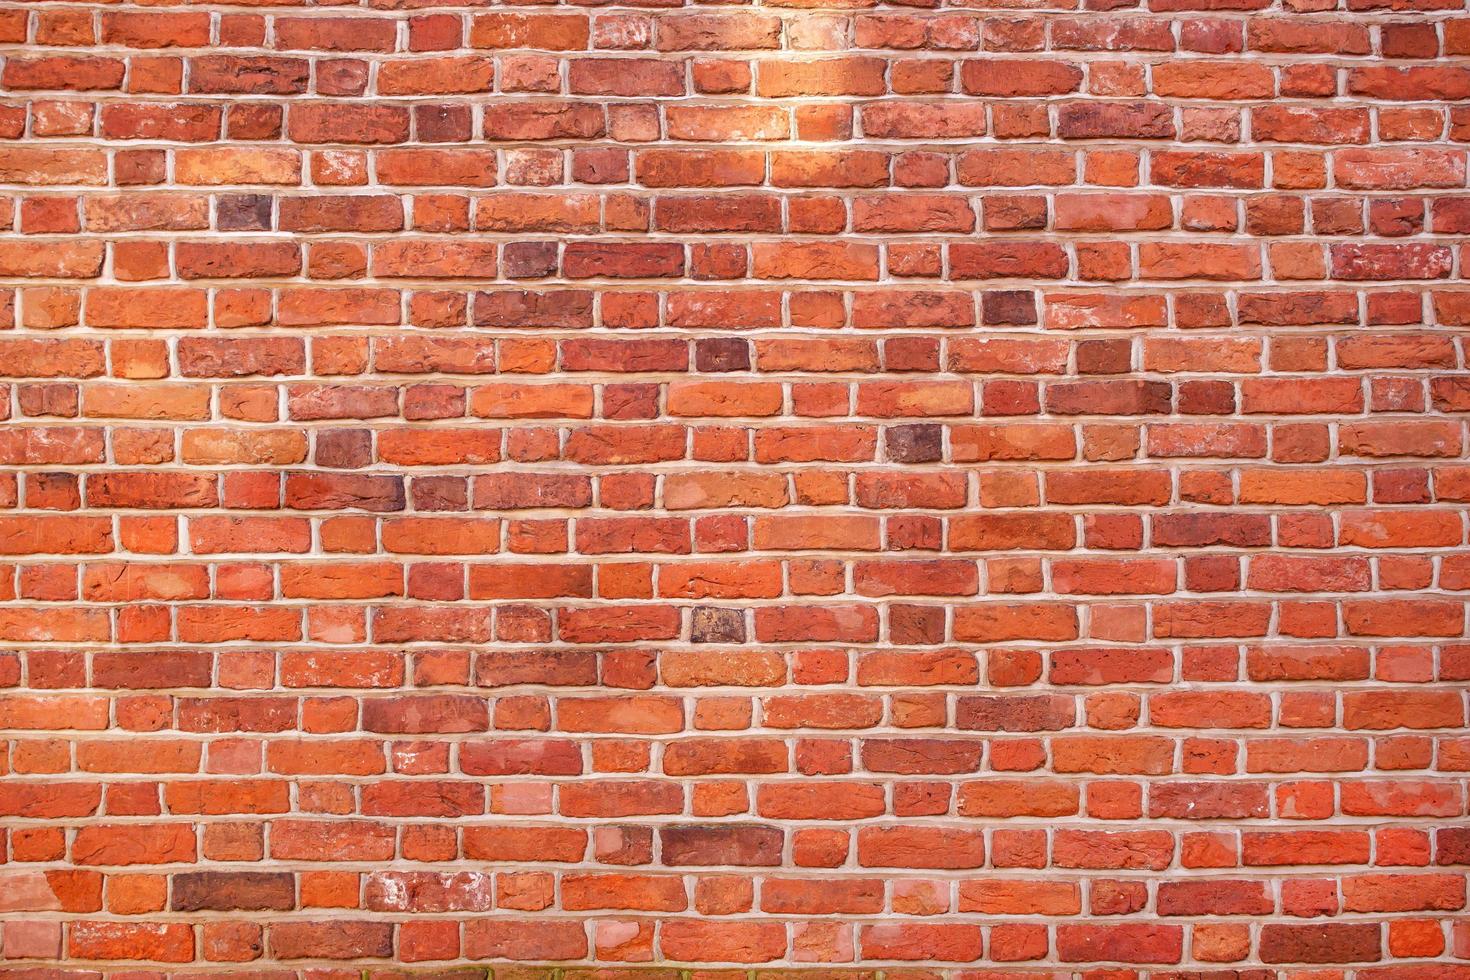 Red brick wall texture  background photo